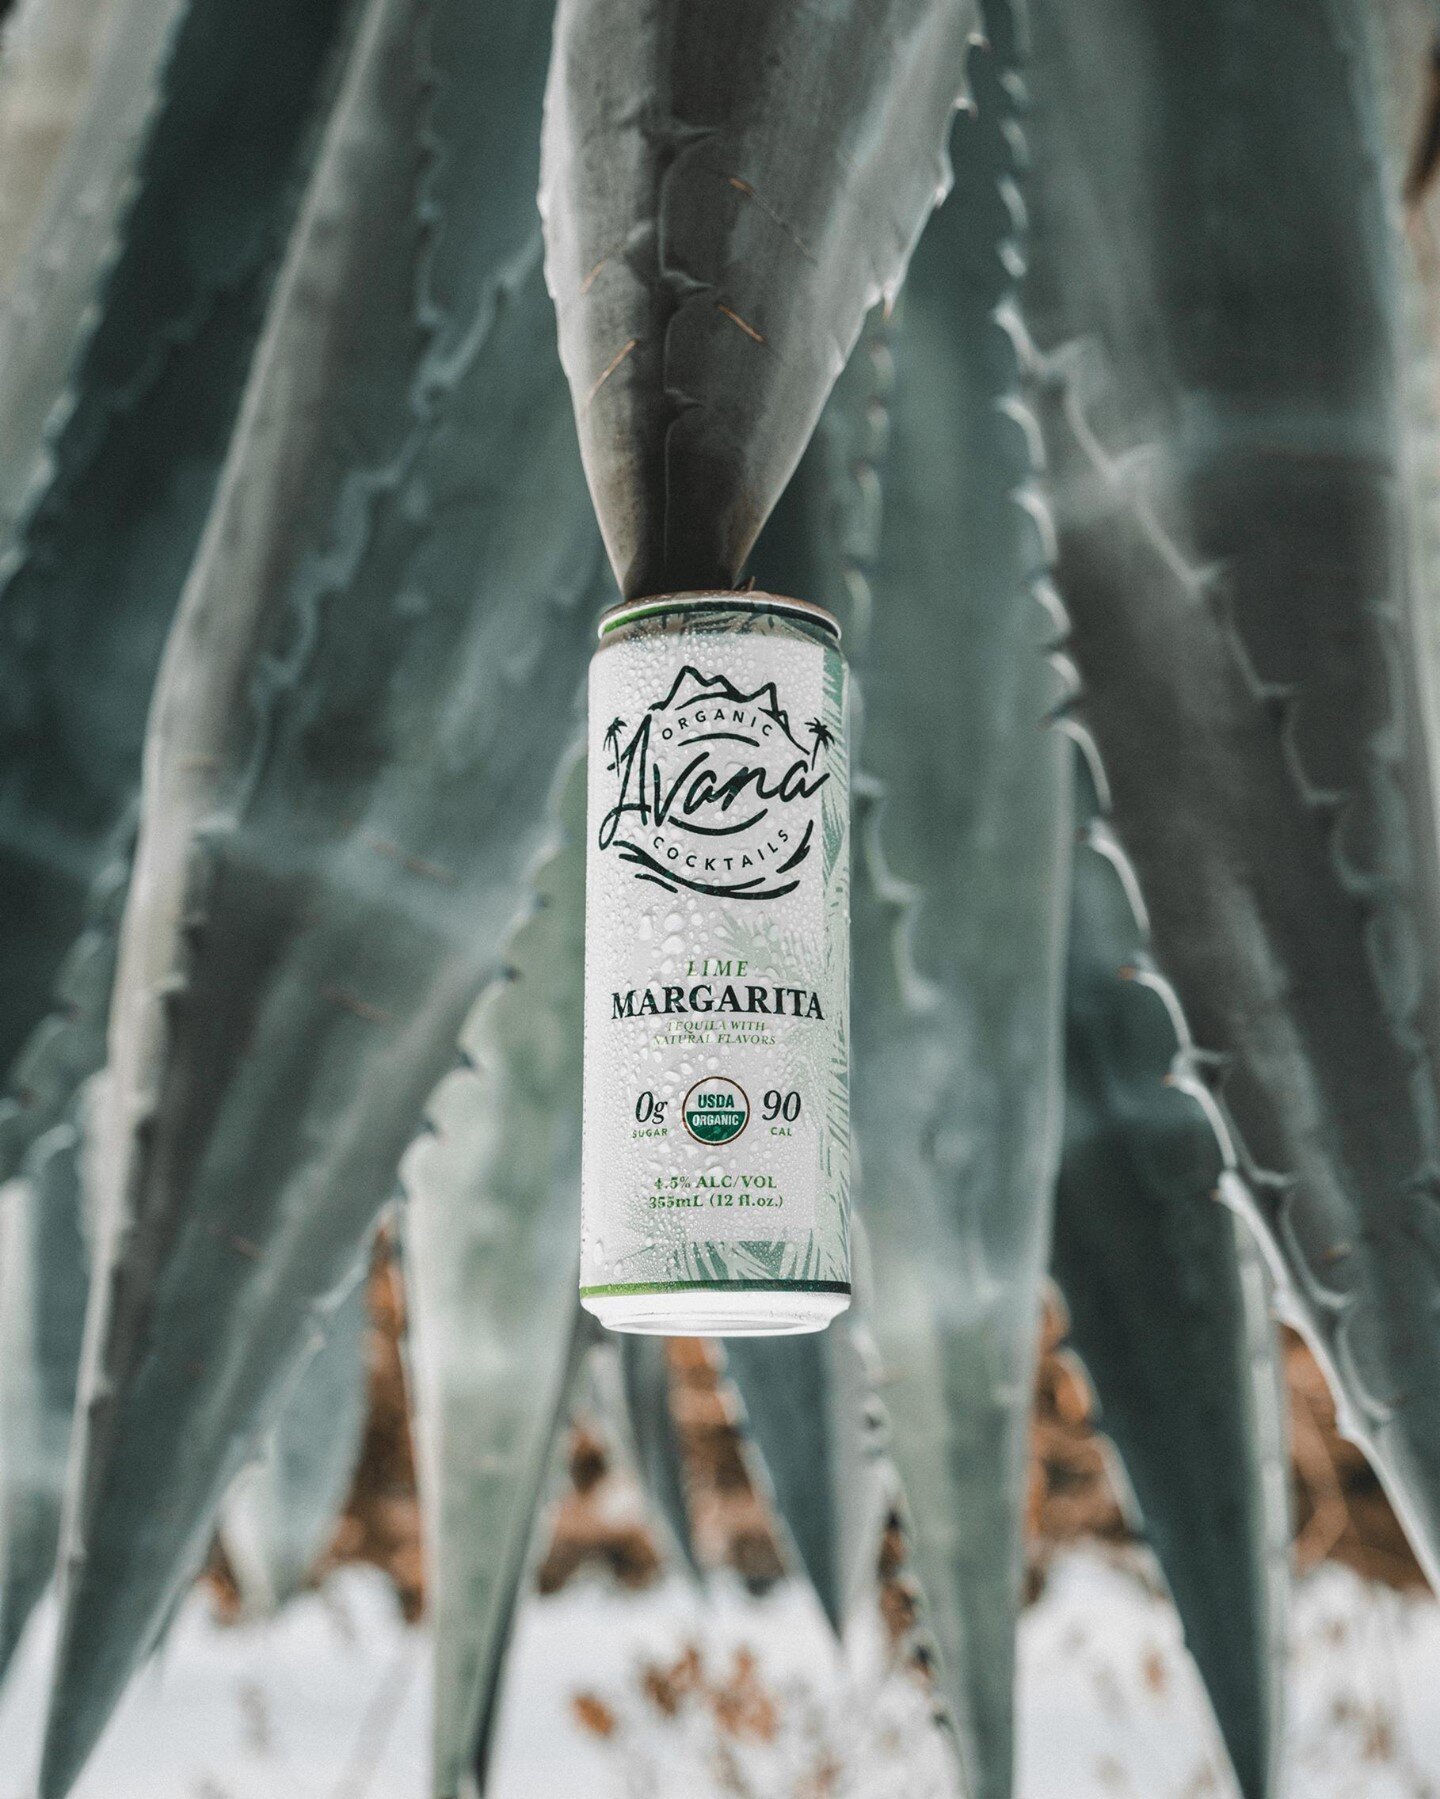 An authentic margarita taste, complemented with an all-natural organic lime flavor 🌟🌵⁠
.⁠
.⁠
.⁠
#drinkavana #usdacertified #usdaorganic #paloma #margarita #theorganicbuzz #organicbuzz #avanacocktails #sparklingcocktail⁠ #tequila #lime